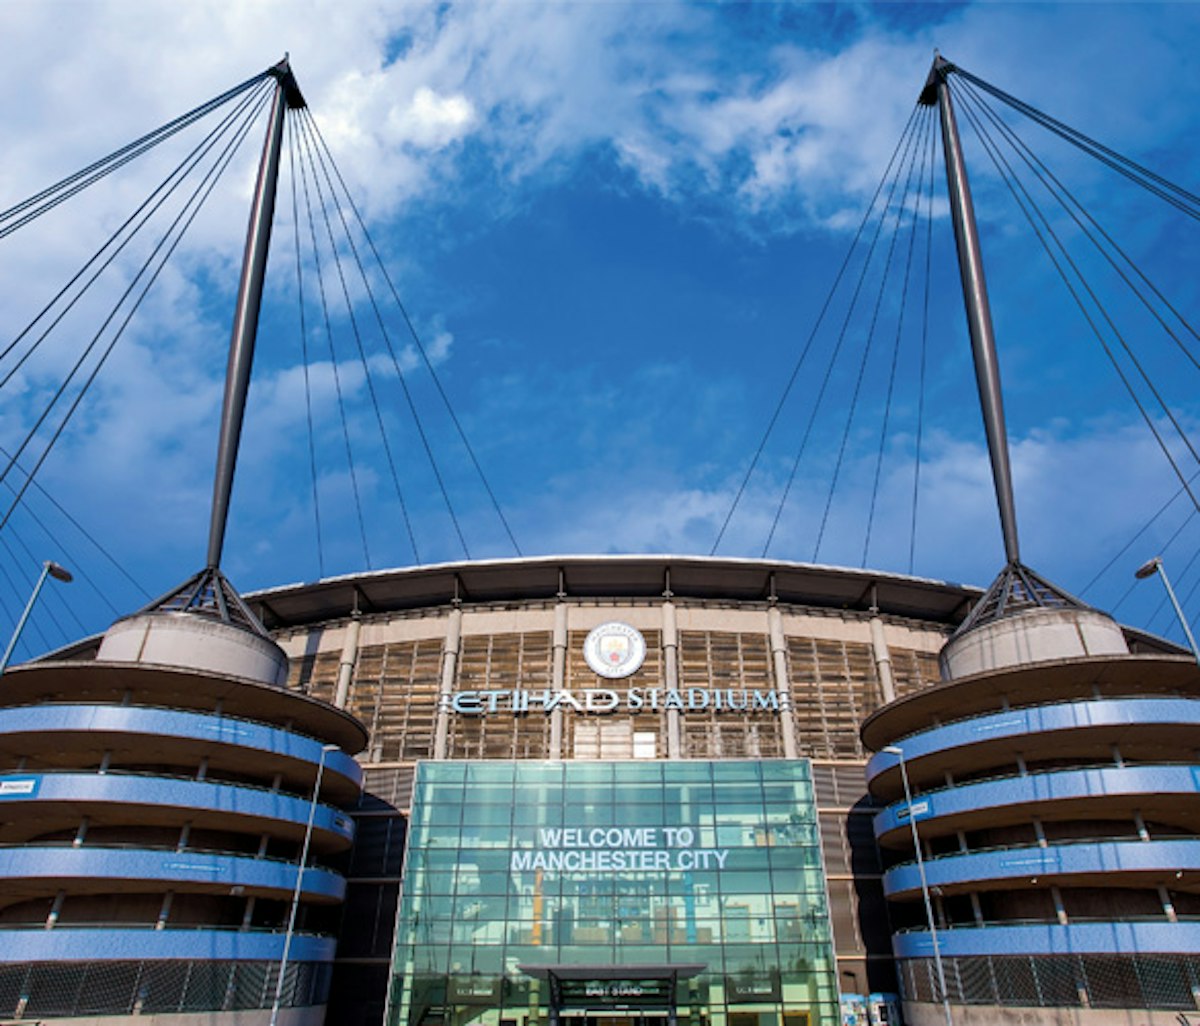 The etihad stadium under a blue sky with clouds, home to manchester city football club.